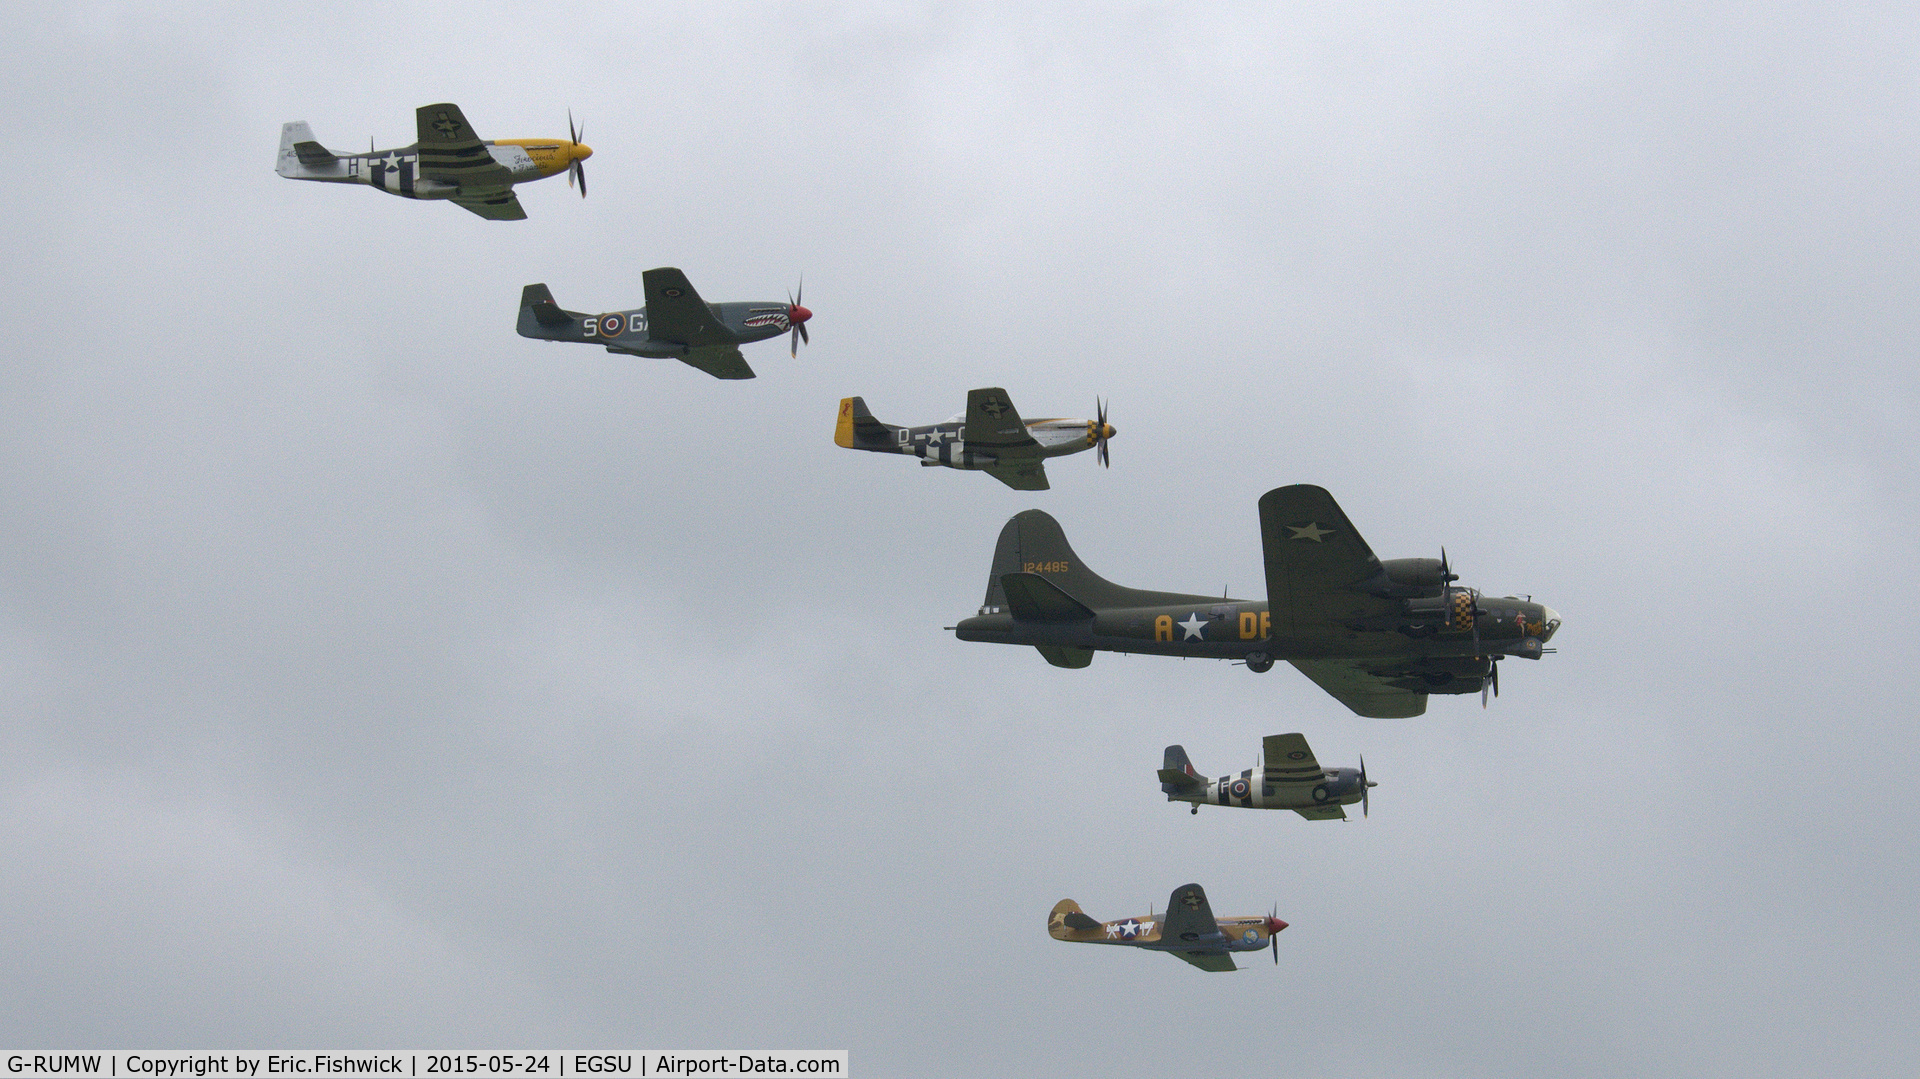 G-RUMW, 1944 General Motors (Grumman) FM-2 Wildcat C/N 5765, 45 G-RUMW participating in precision formation flying during the VE Day Salute at The IWM VE Day Anniversary Air Show, May 2015.